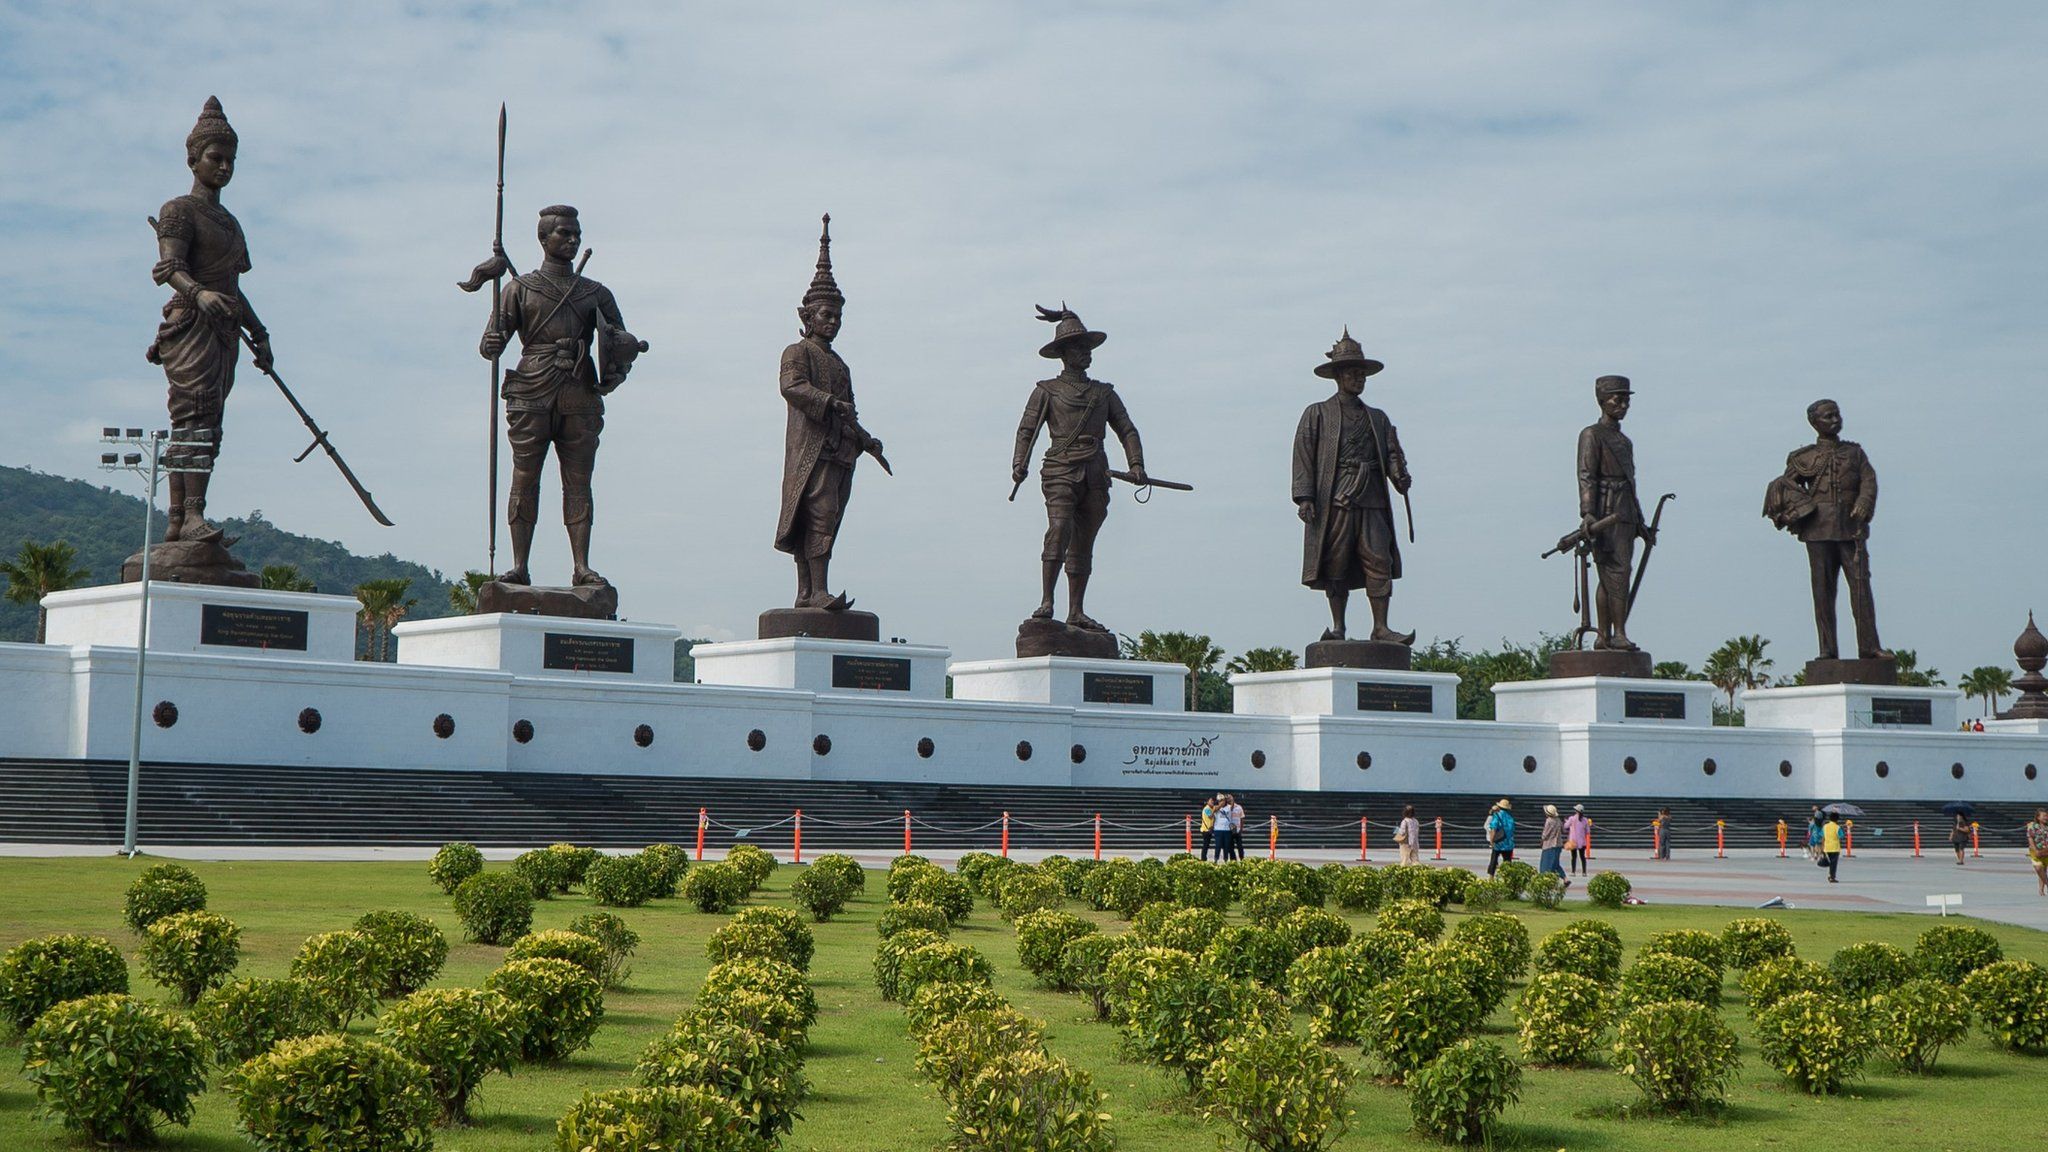 Statues of seven kings on display in the park